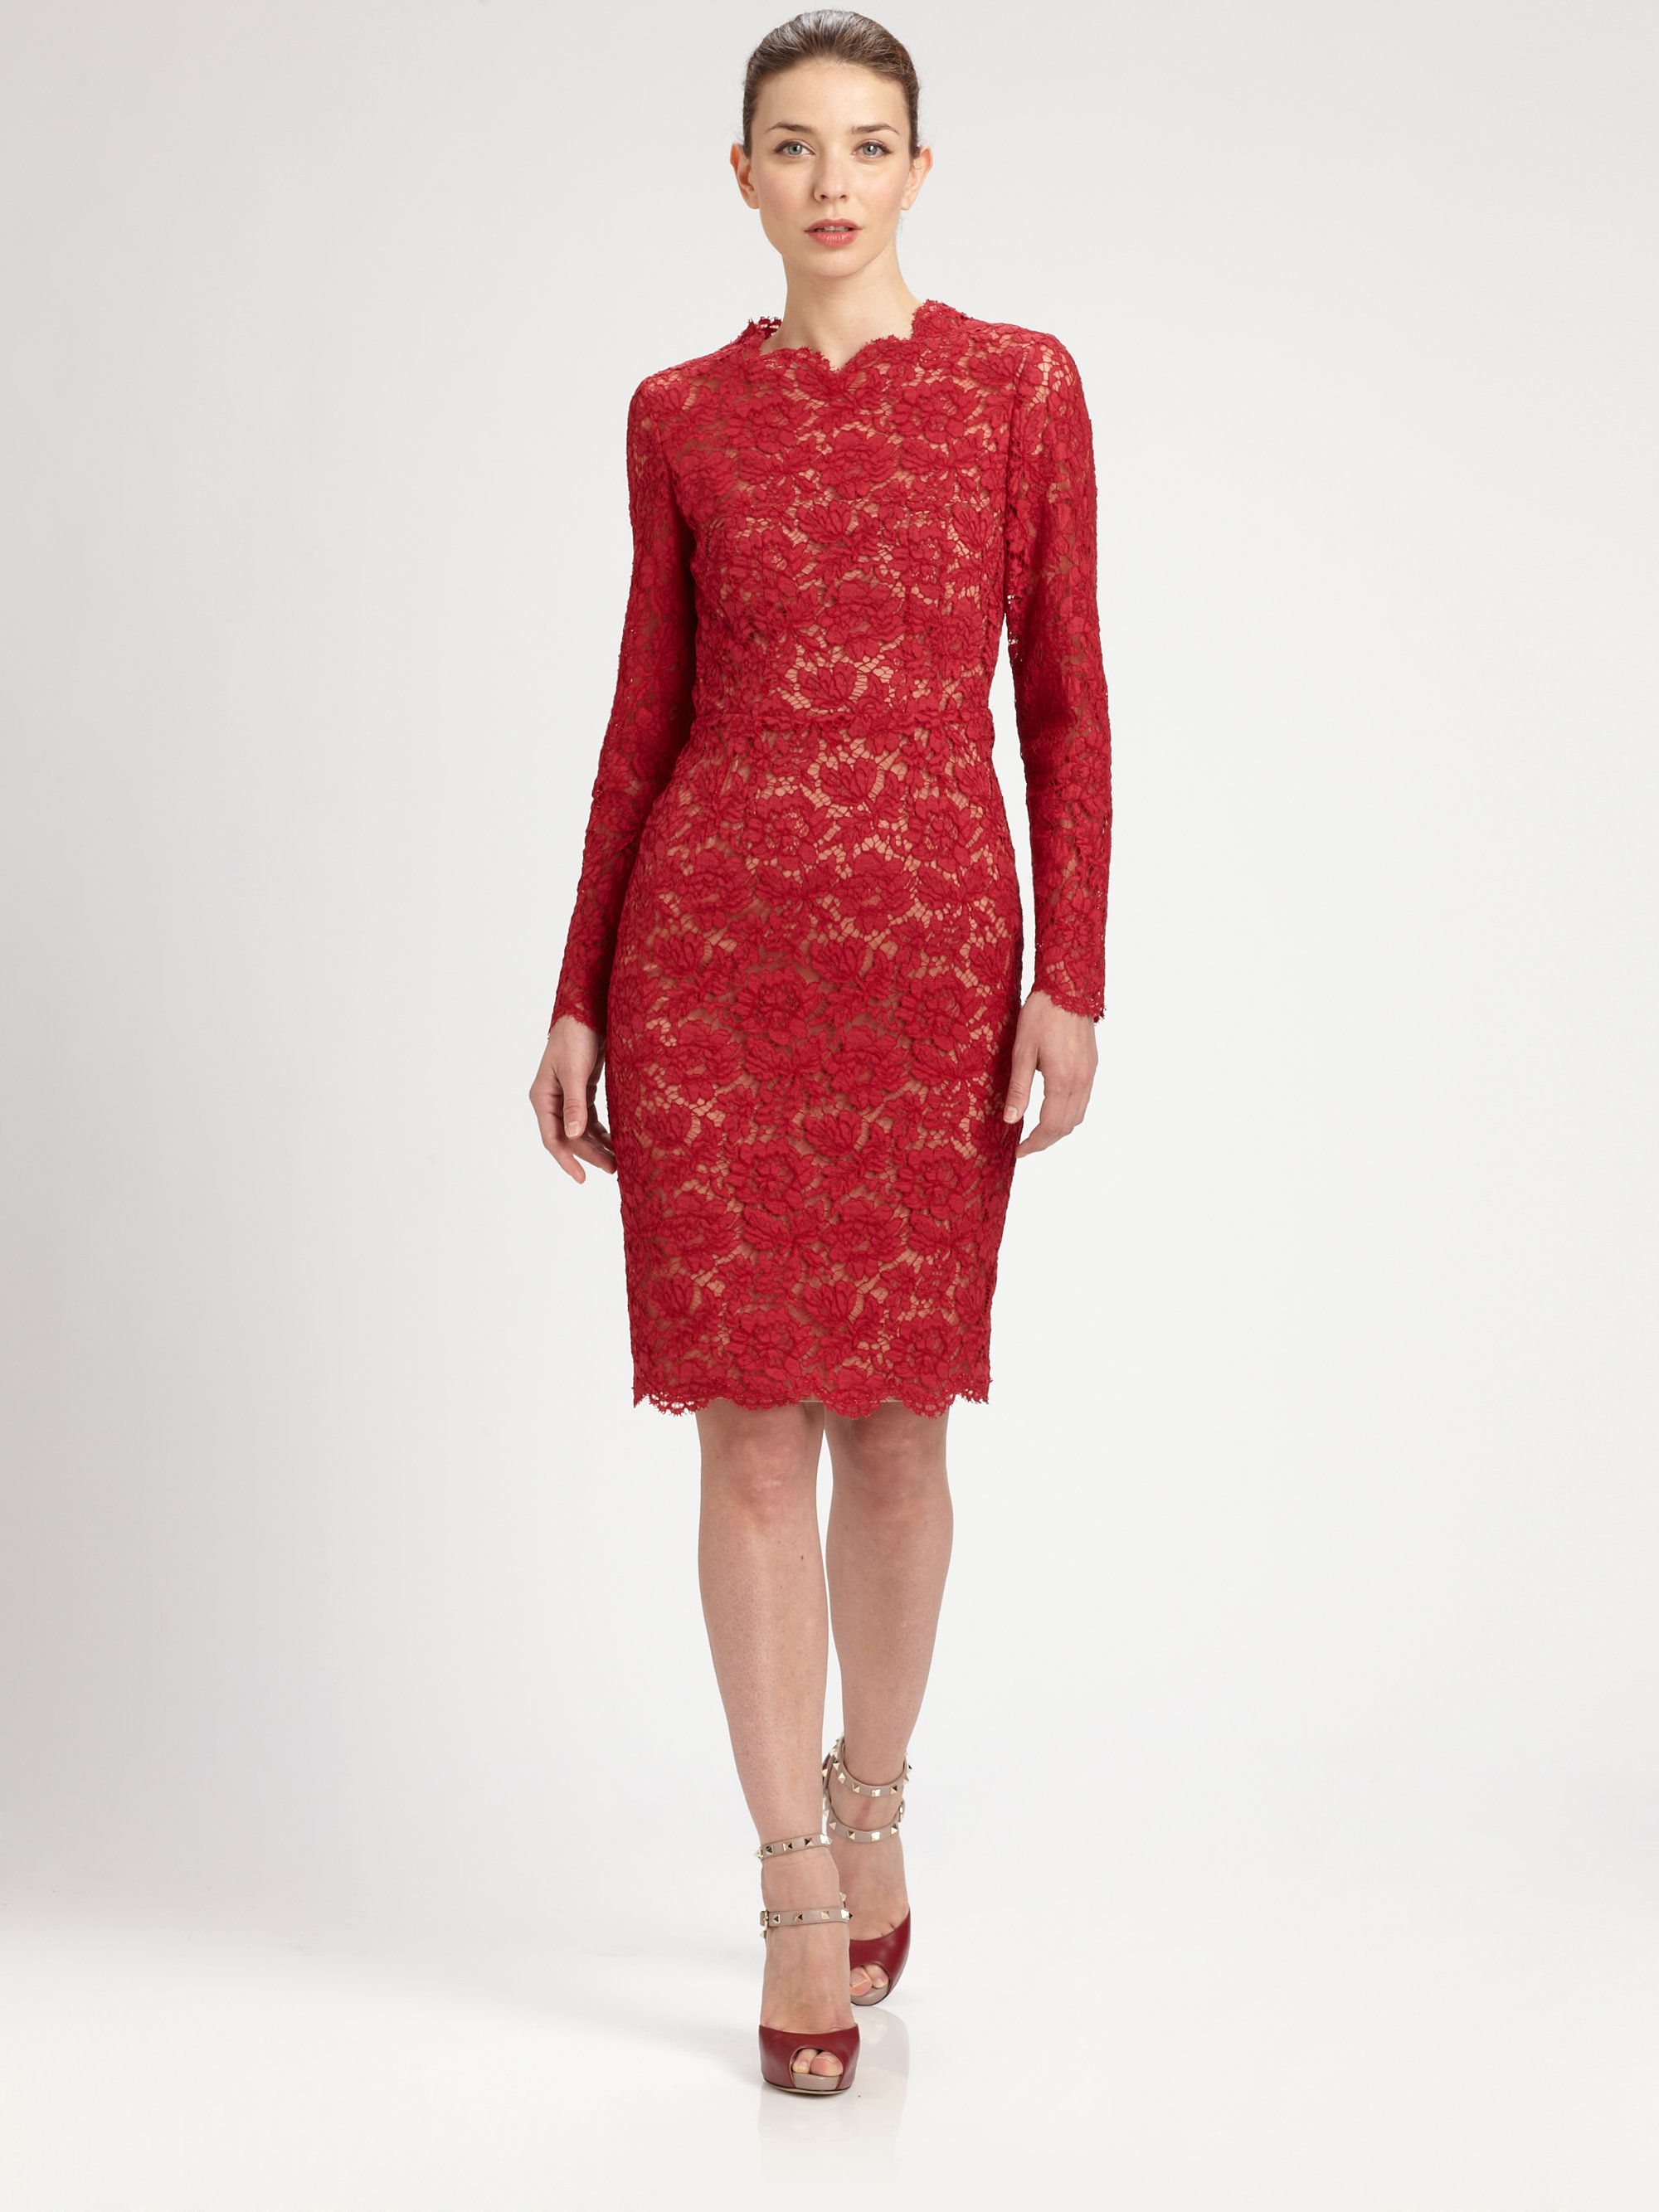 Valentino Long-sleeved Lace Dress in Red - Lyst